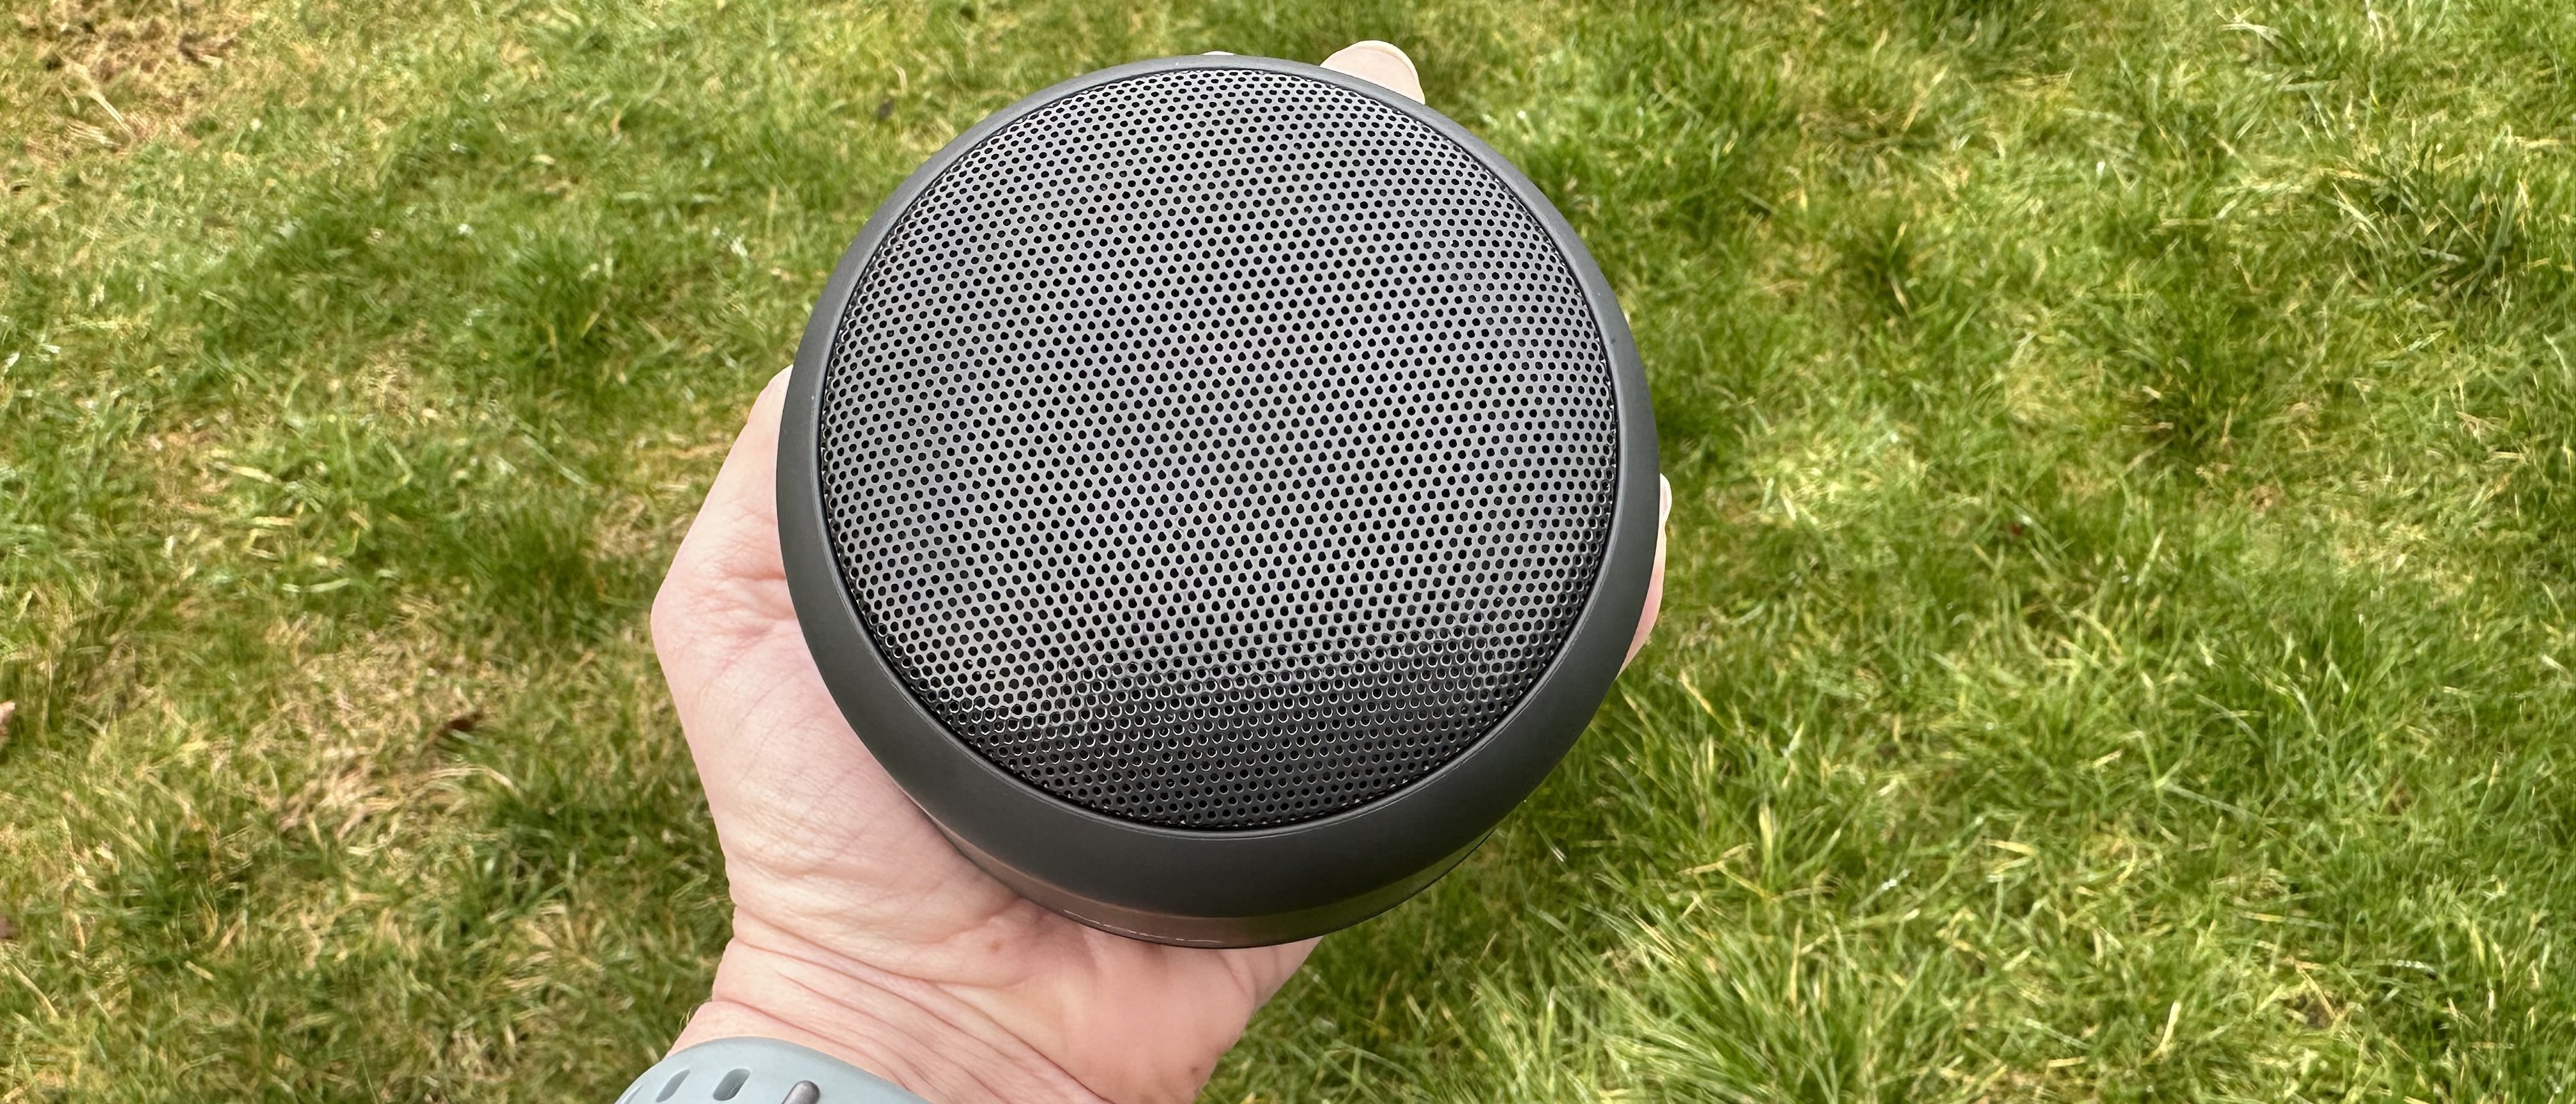 Nokia Portable Wireless Speaker 2 huge | cheap review: TechRadar a battery with speaker Bluetooth life